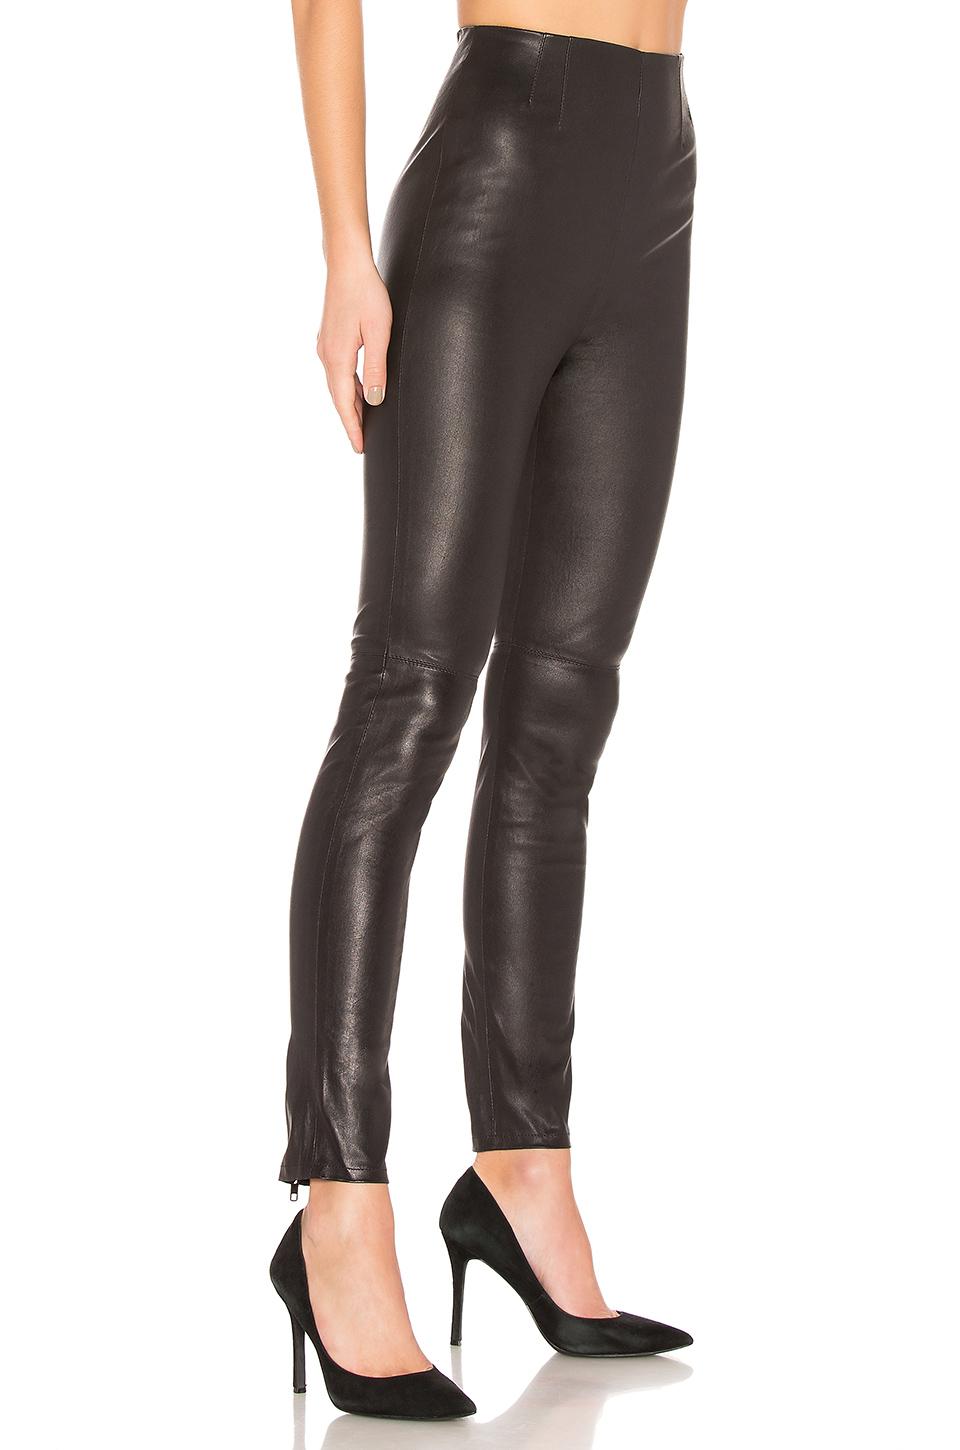 L'academie Angelica Leather Pants in Black - Lyst